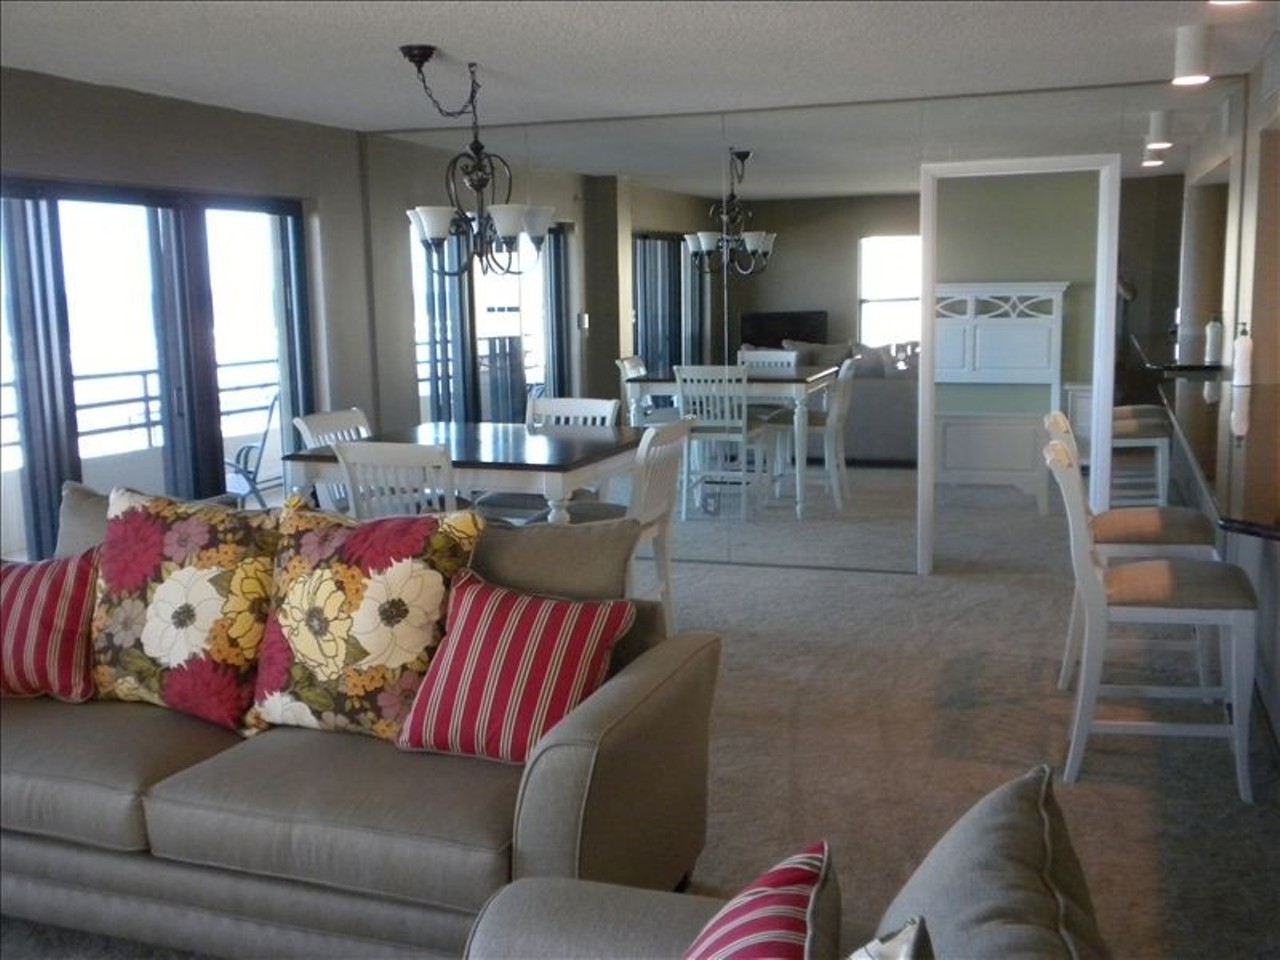  Stay at this three-bedroom beachfront condo in Daytona
Average night $95 
3 bedrooms
There's a huge mirror, in case your fraternity brothers need to admire themselves before going out to rage.